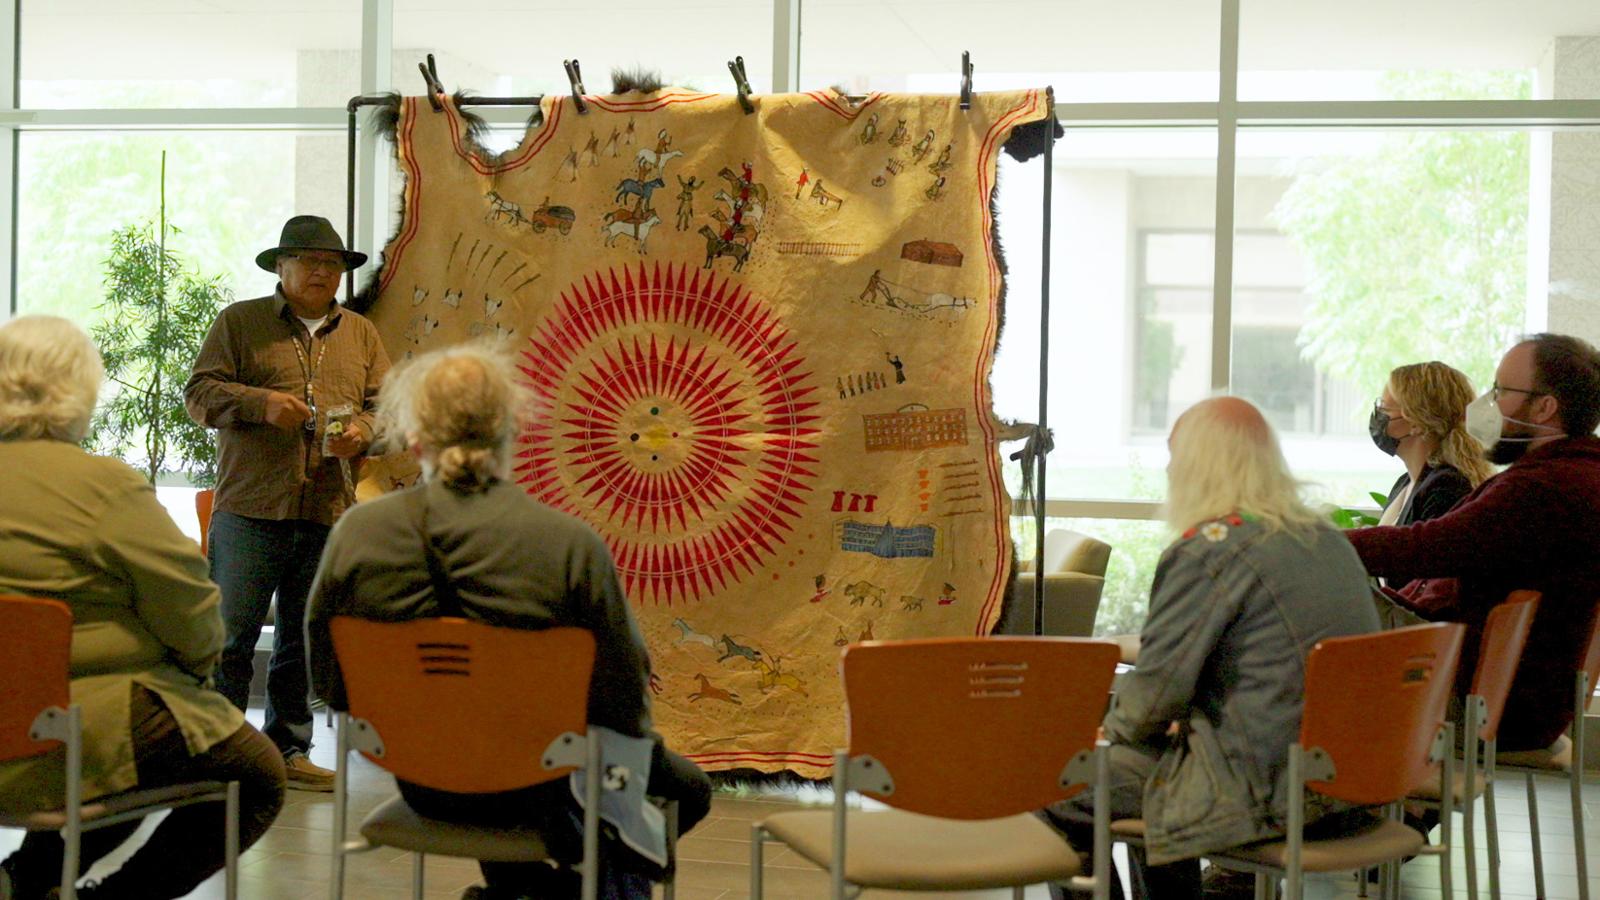 The history of the Buffalo Winter Robe is shared during a presentation at the University of Regina. 